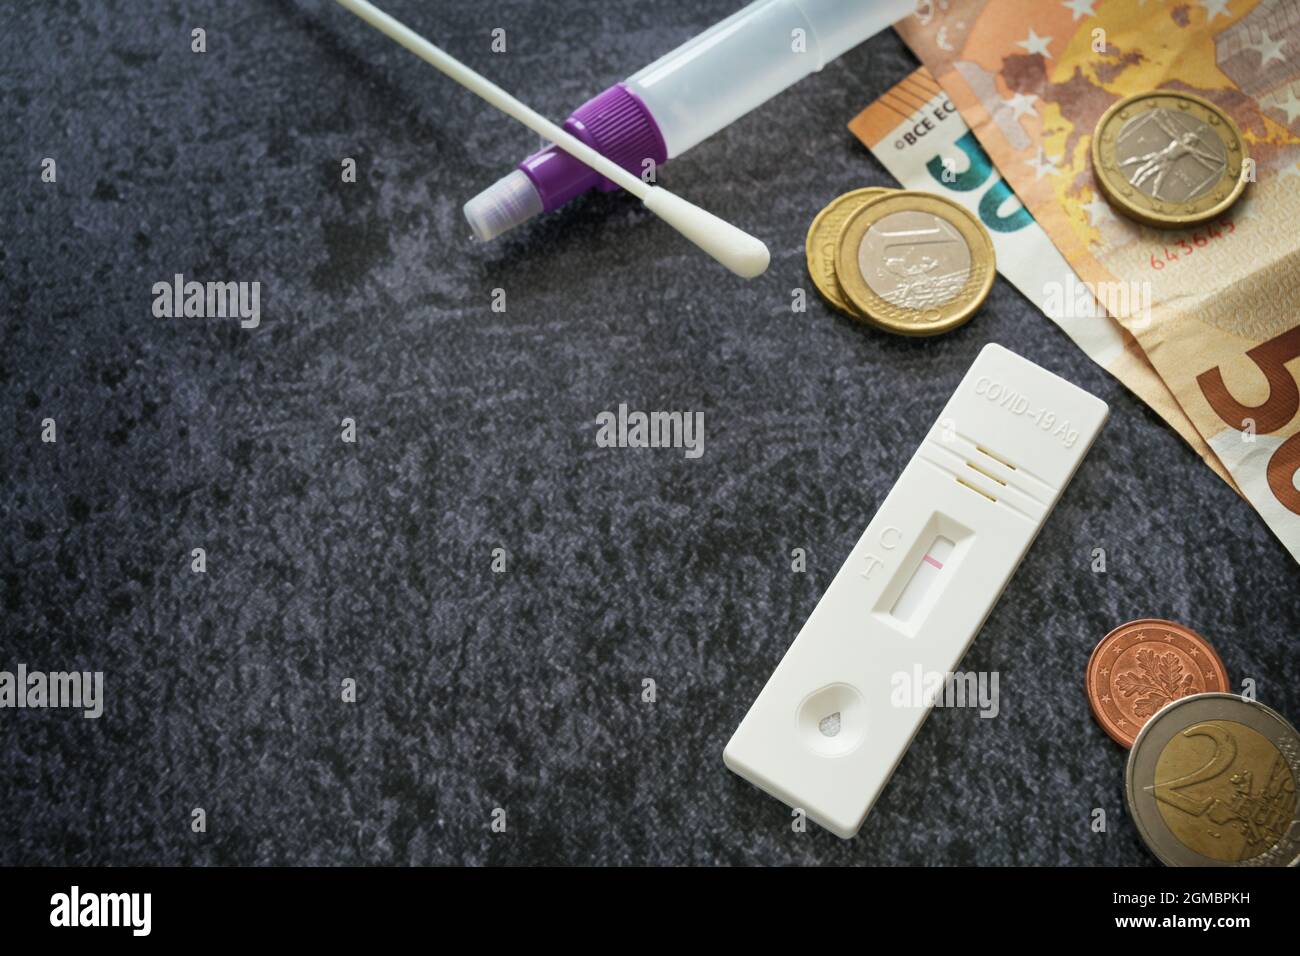 Required covid-19 rapid test kit and euro money, costs for health care and safety participating in public life during coronavirus pandemic, dark gray Stock Photo